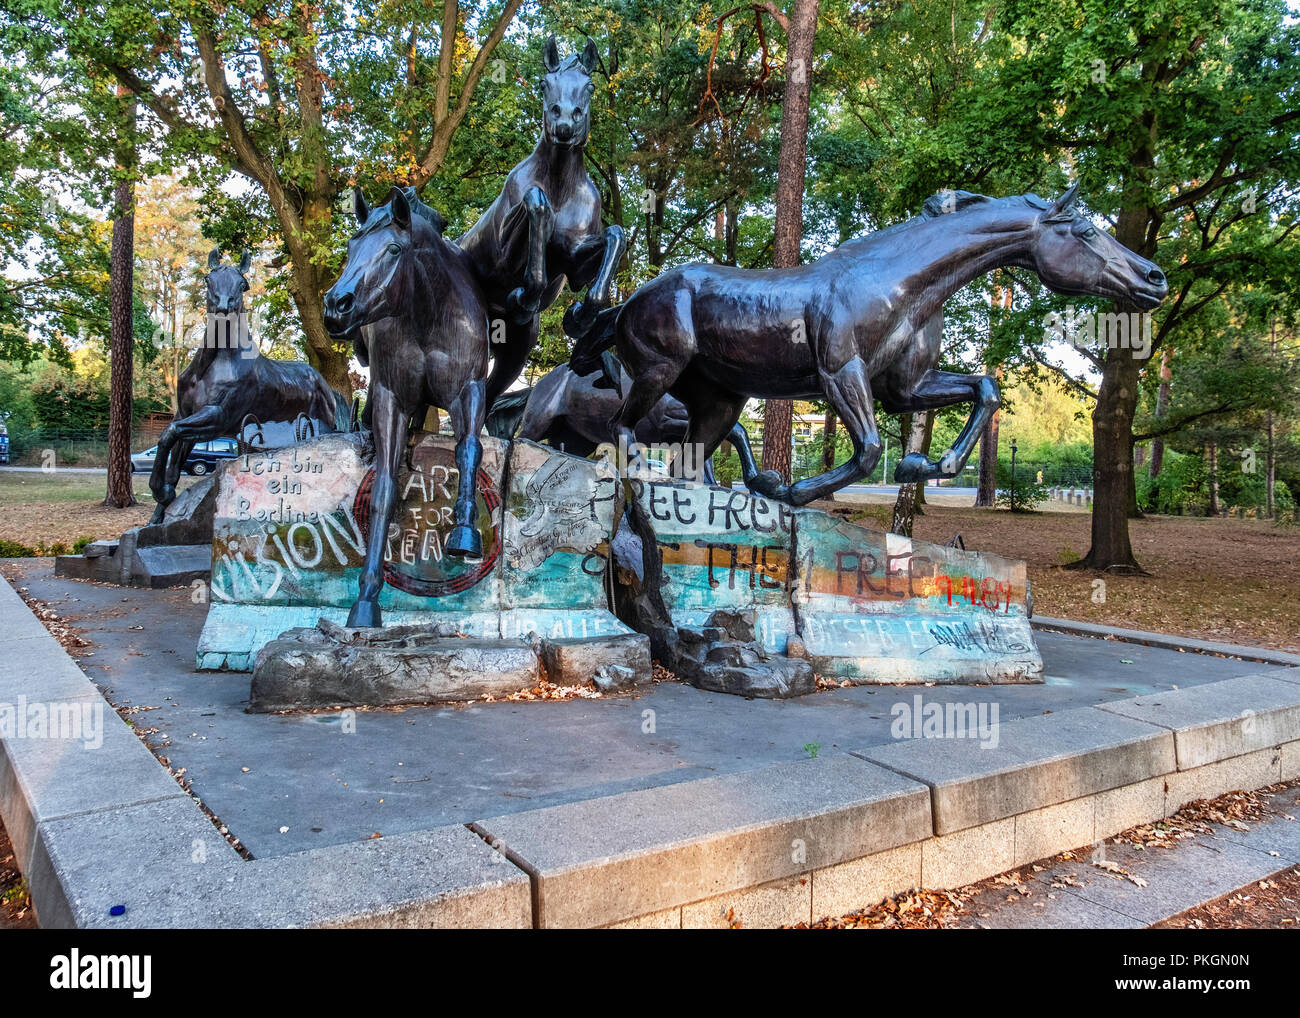 Berlin,Dahlem. Bronze sculpture of five wild horses jumping over remains of Berlin Wall. Gift from USA to FDR commemorates the day the wall fell. Stock Photo